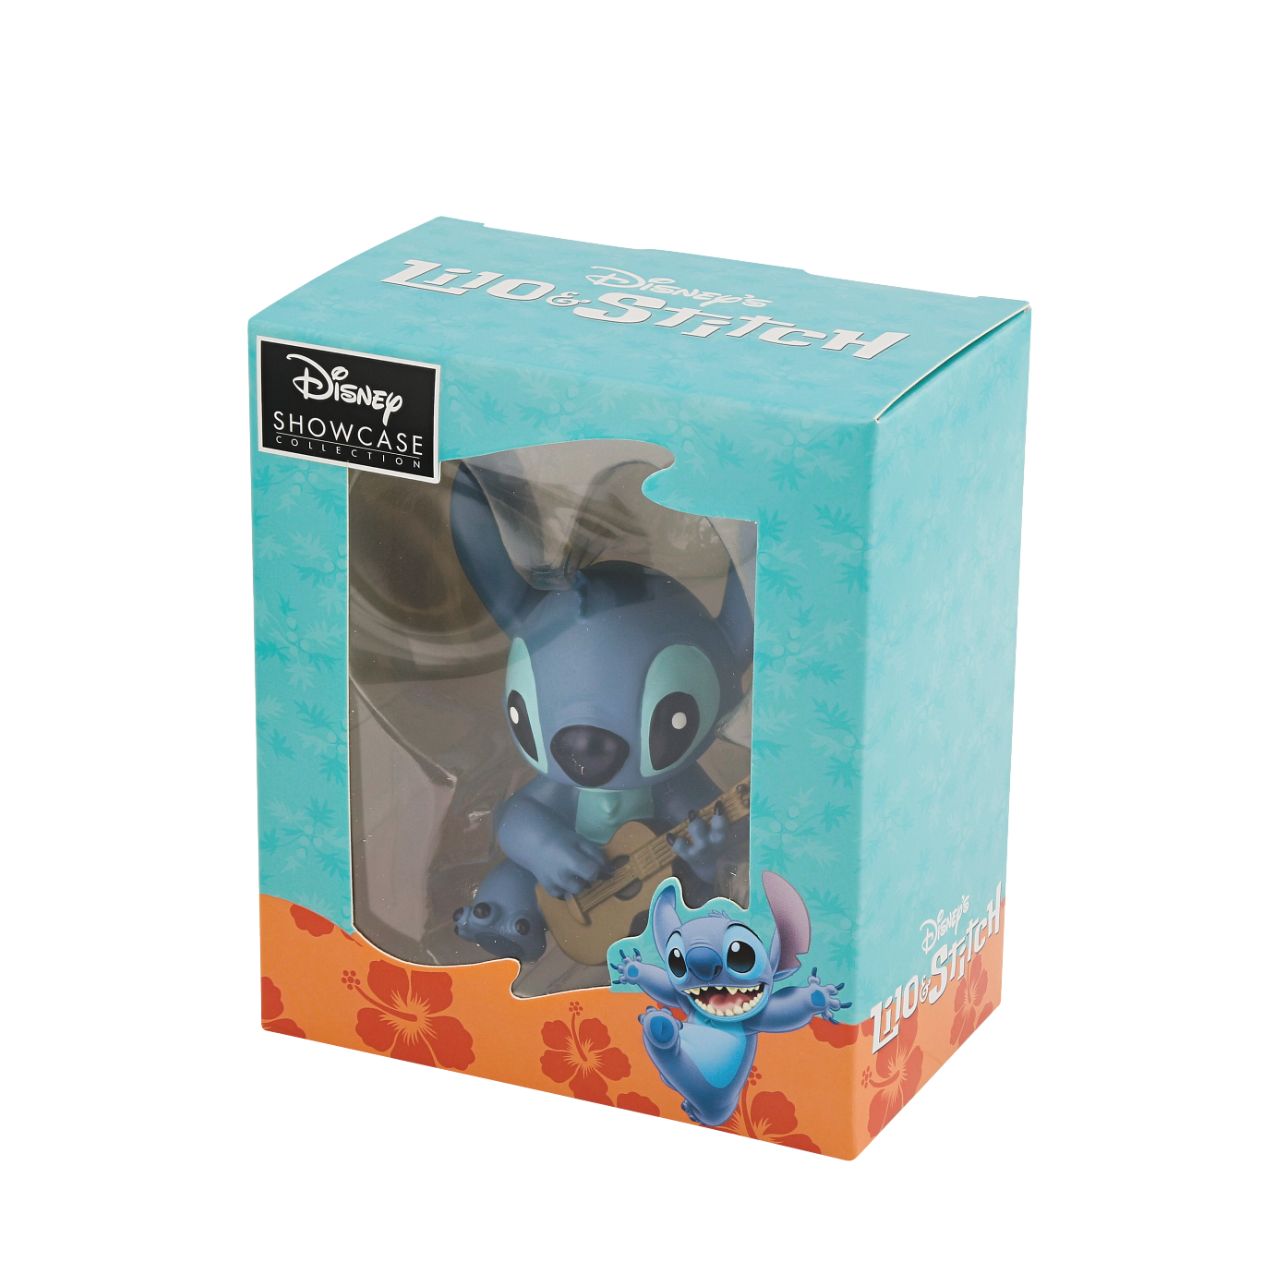 Stitch Guitar Figurine Disney Showcase  Here to play you your favourite tune, Lilo's best friend Stitch will turn any frown upside down. With perked ears and a sweet smile, this little guy will help your mind drift away to Hawaiian paradise.